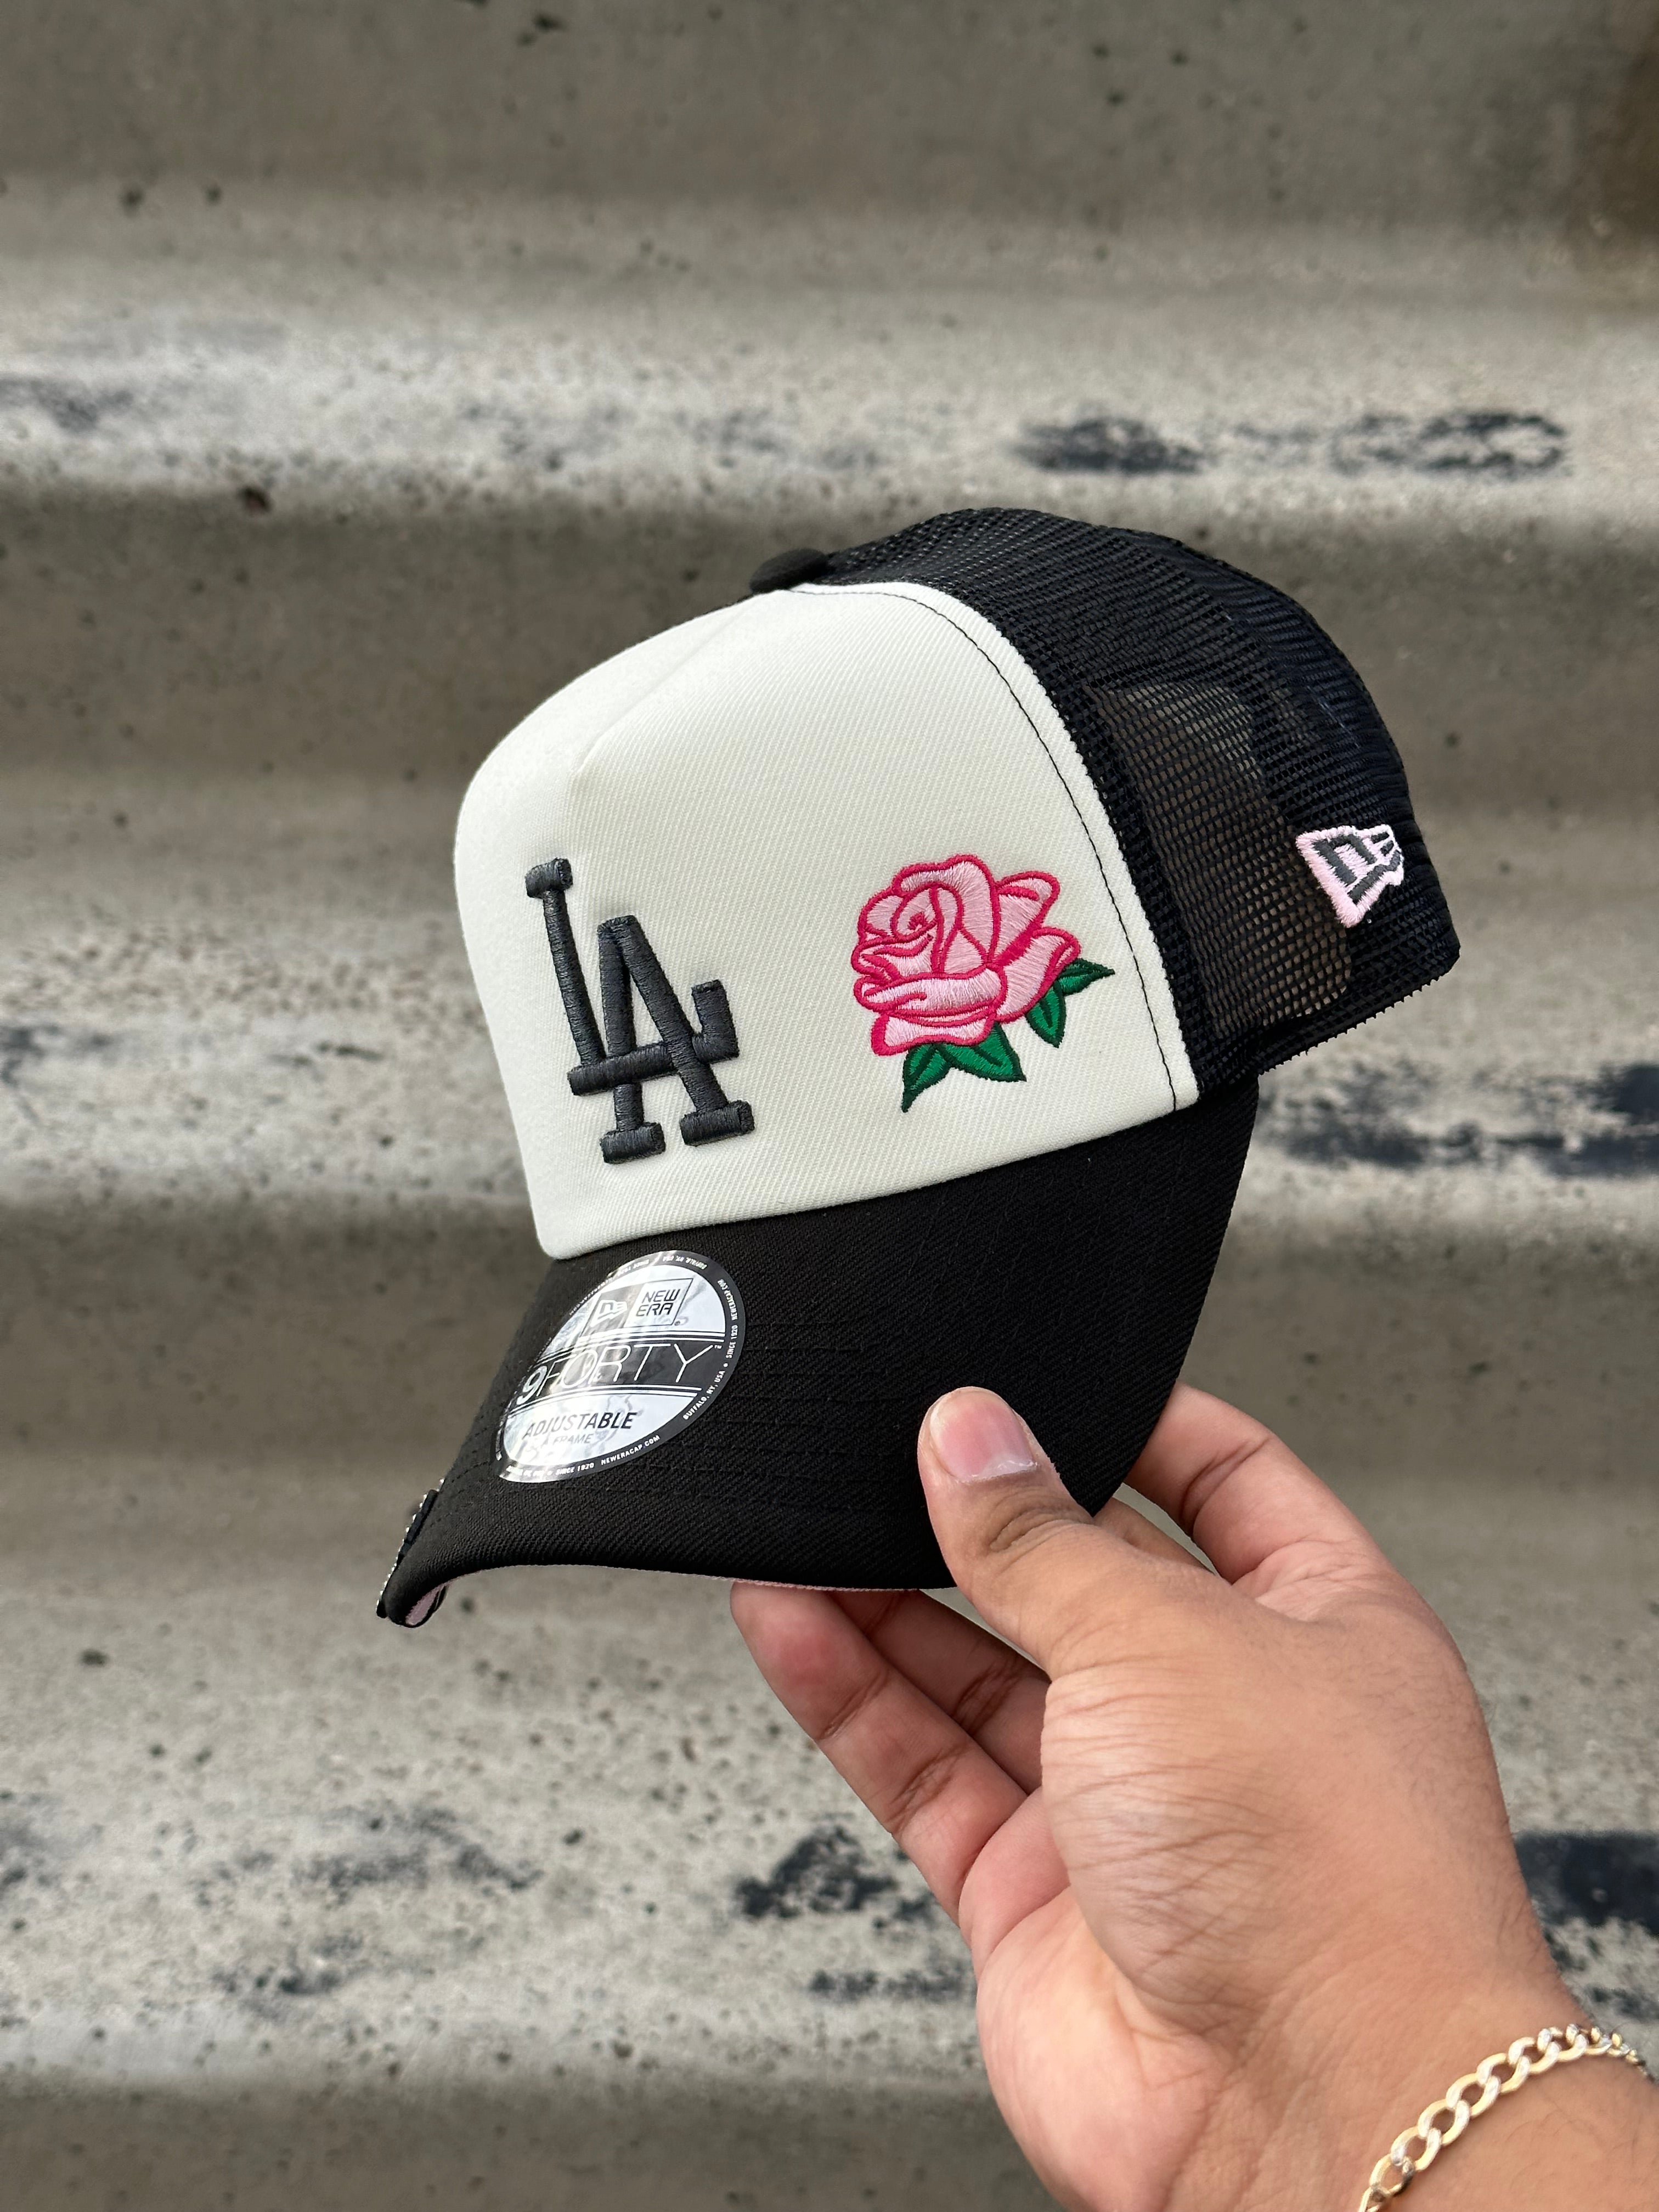 NEW ERA EXCLUSIVE 9FORTY A-FRAME WHITE/BLACK LOS ANGELES DODGERS W/ PINK ROSE + 100TH ANNIVERSARY SIDE PATCH